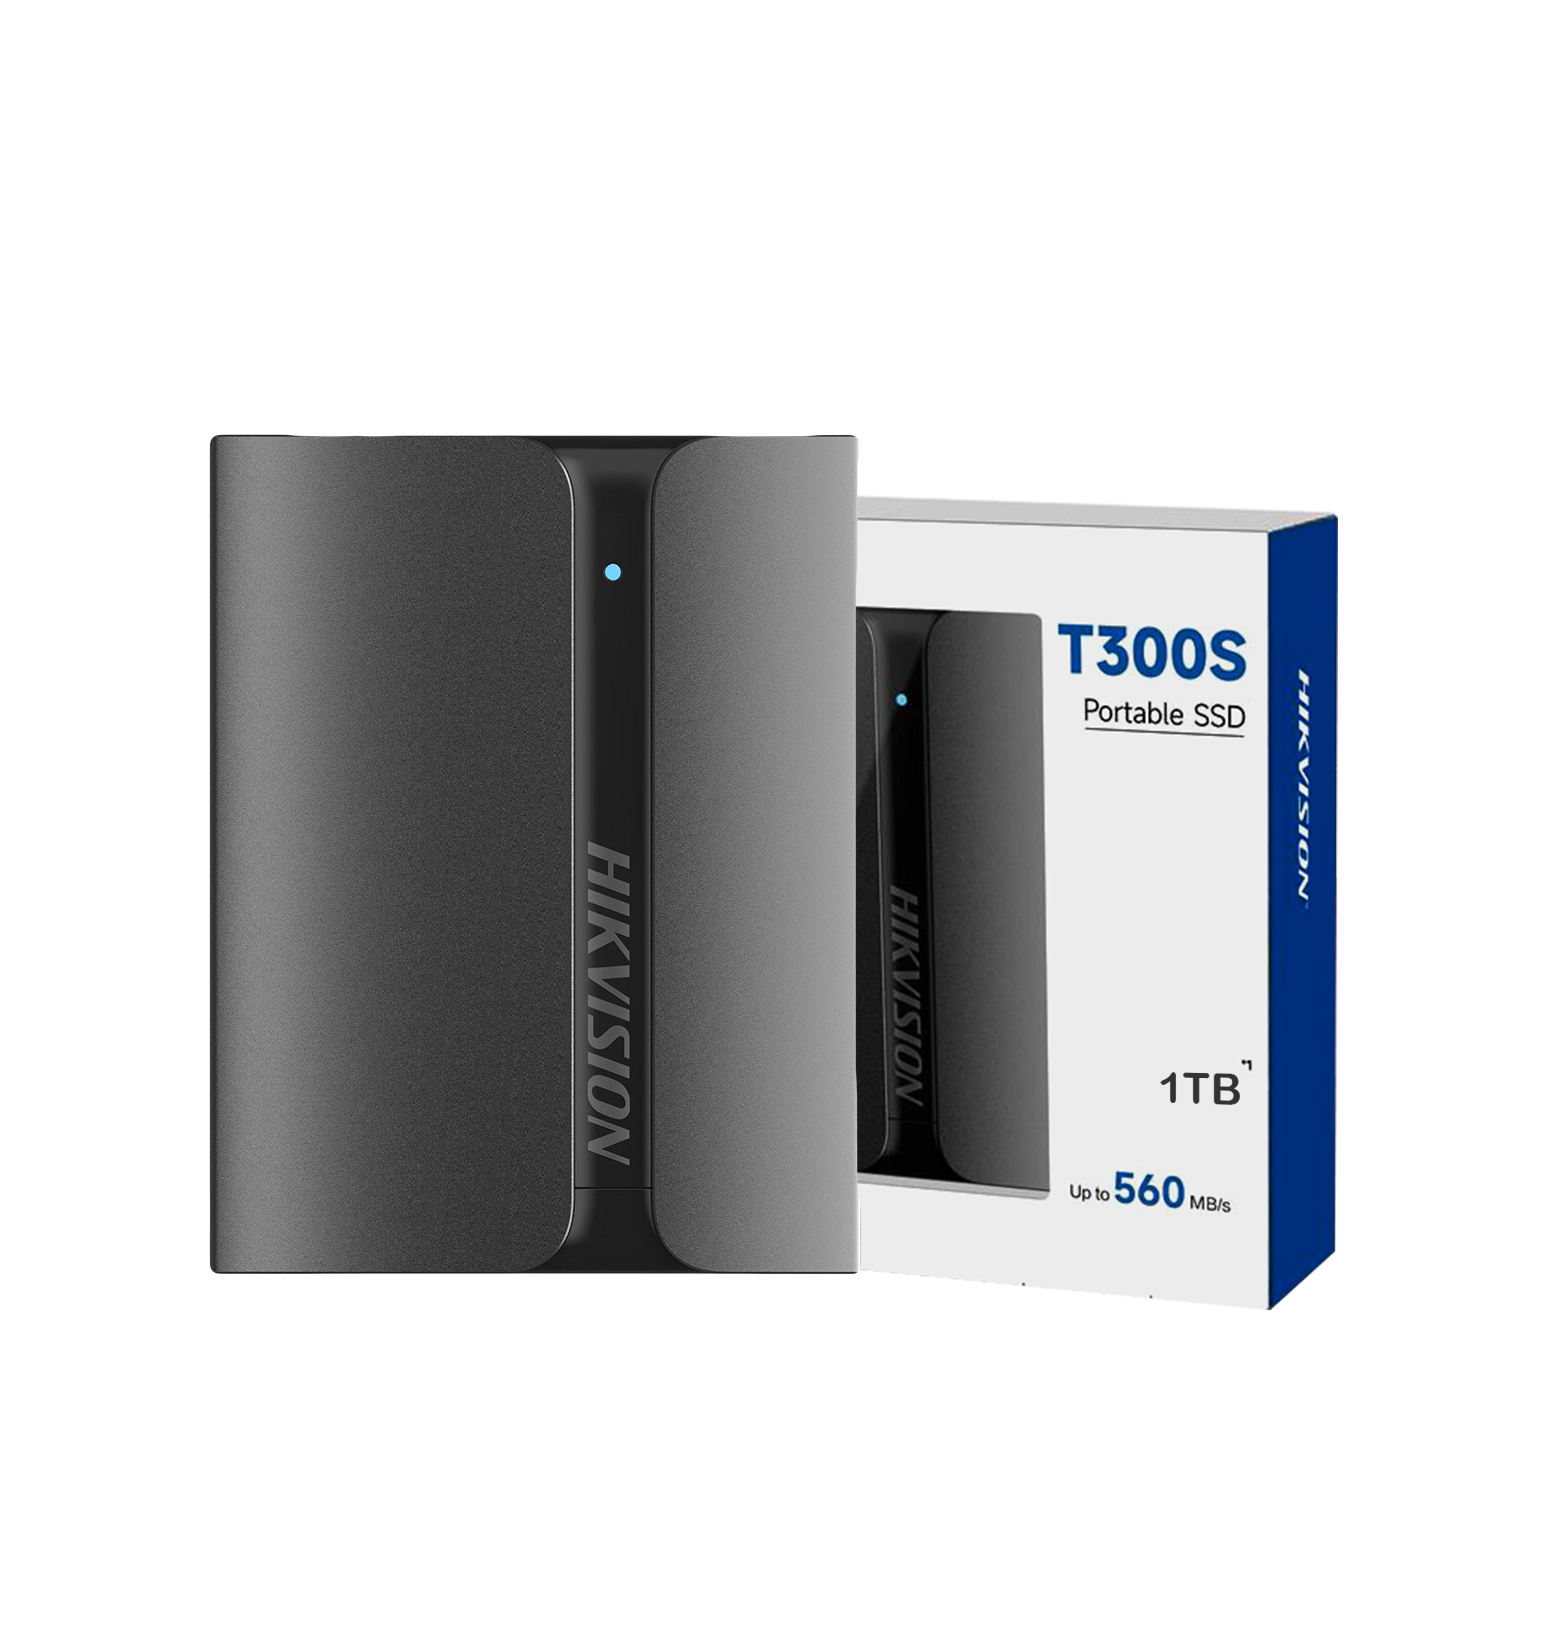 HIKVISION T300S-1TB-Portable SSD